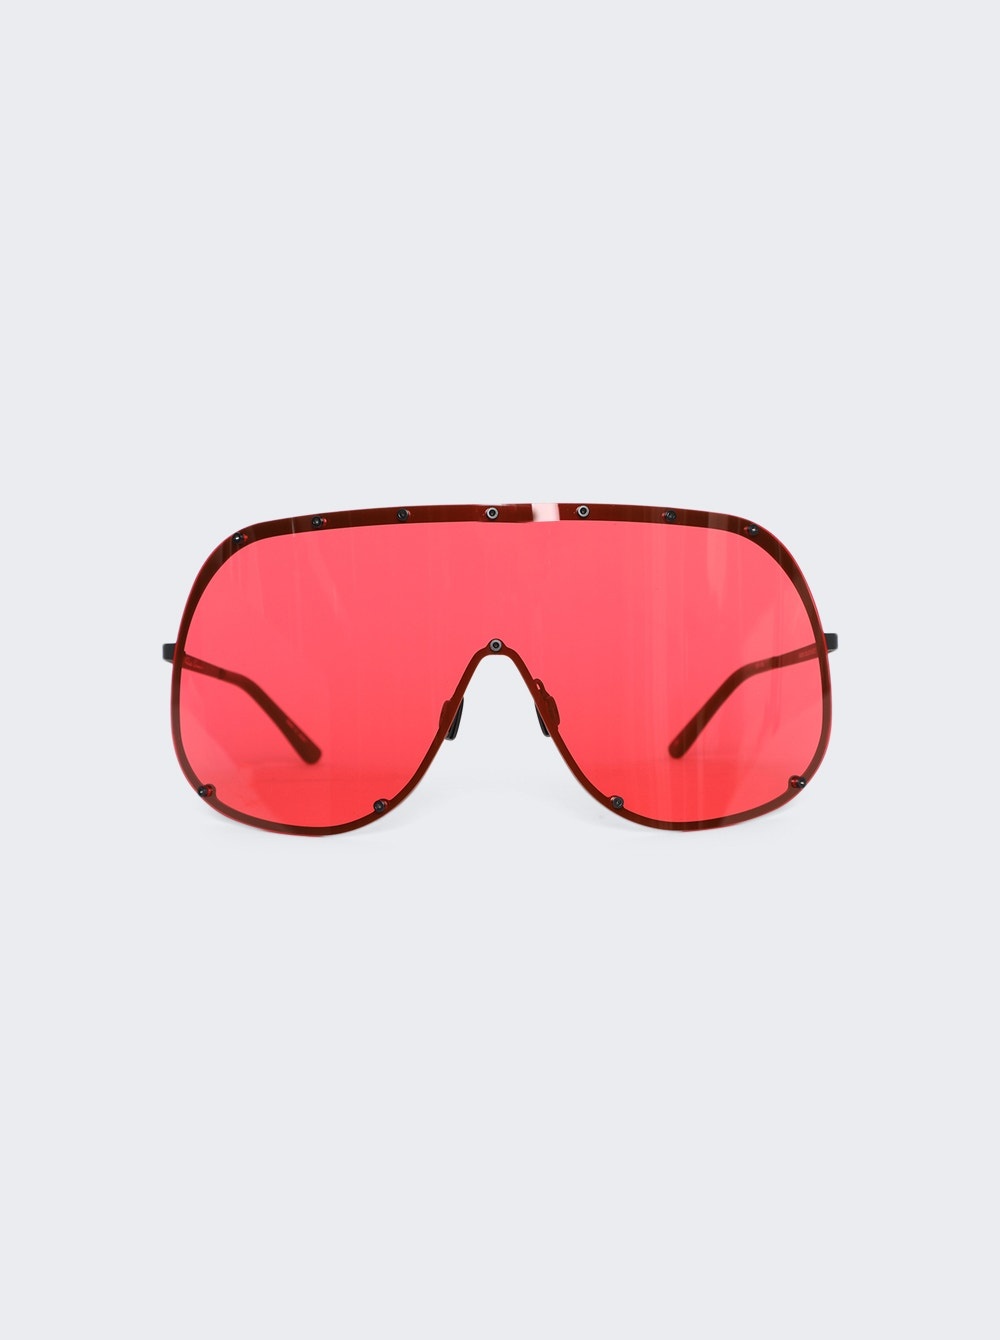 Shield Sunglasses Black And Red - 1